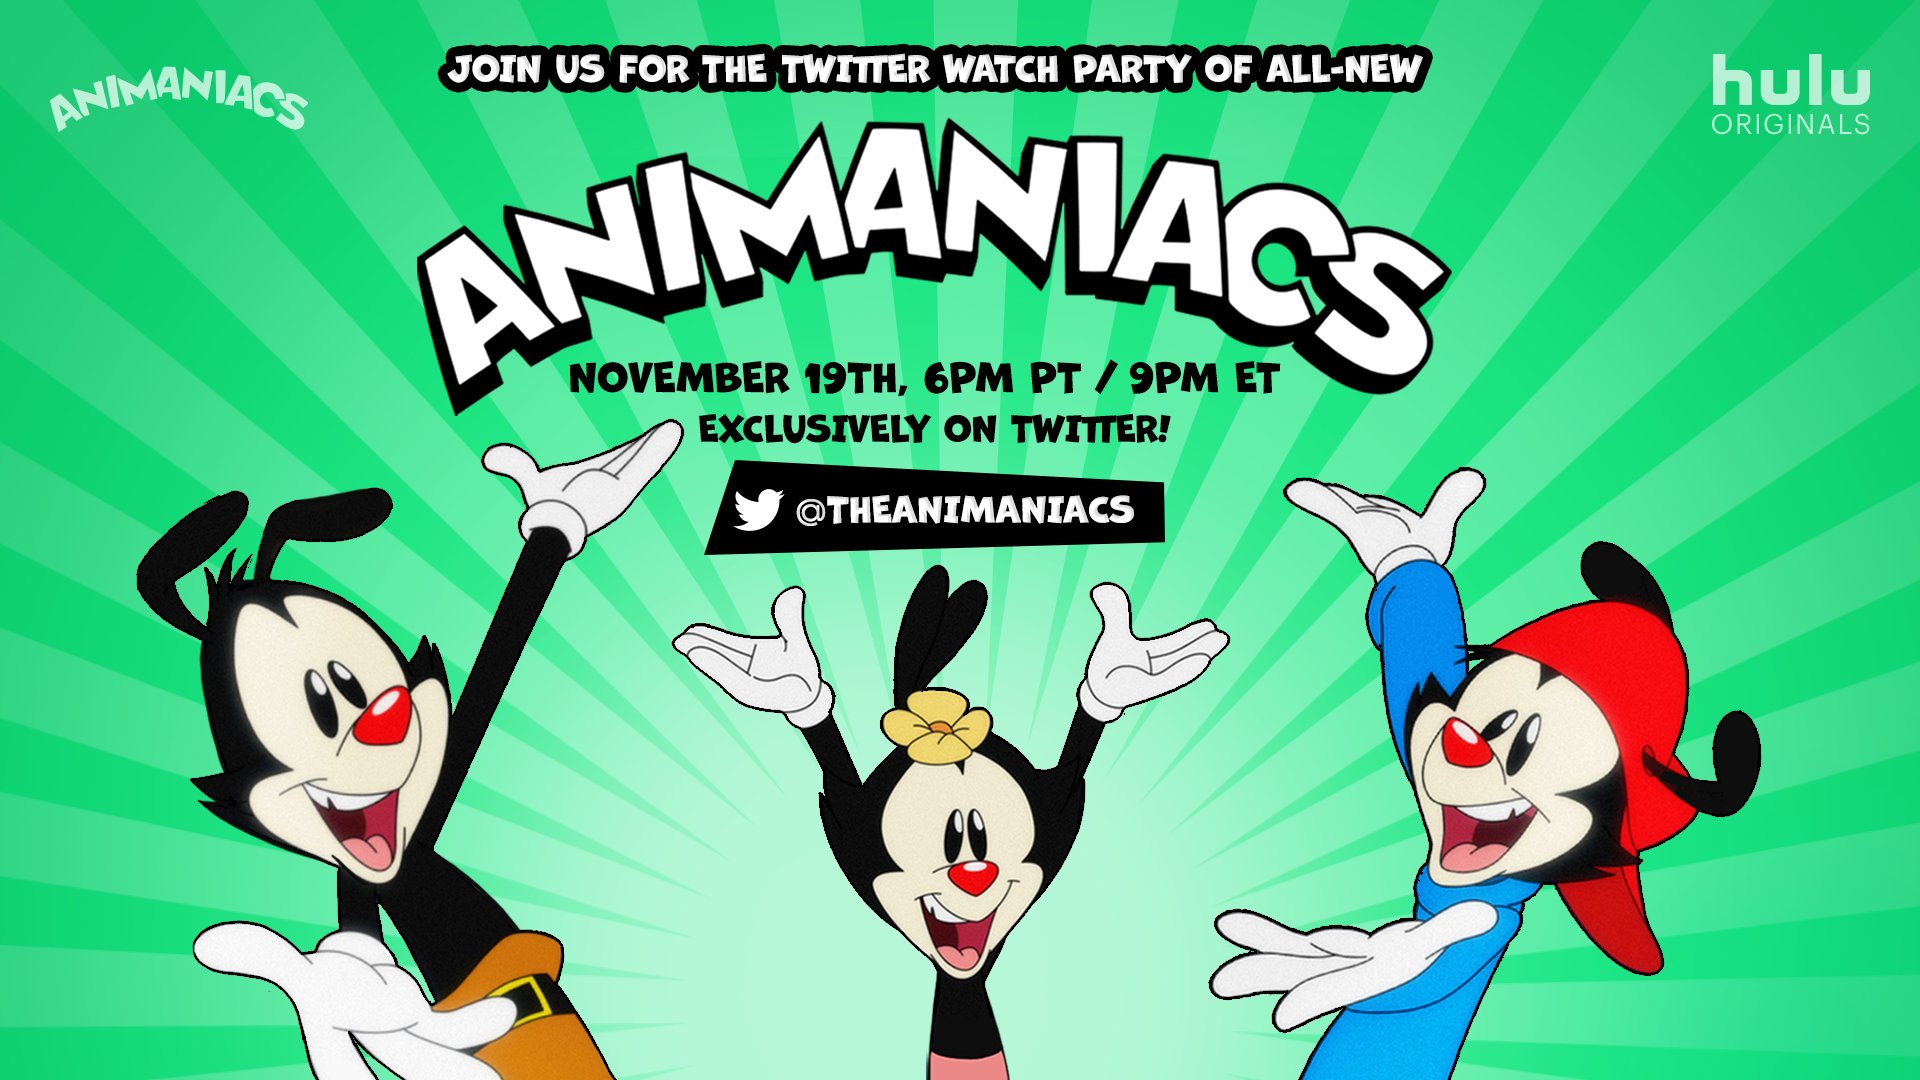 Watch the first episode of the all-new Animaniacs exclusively on Twitter an...